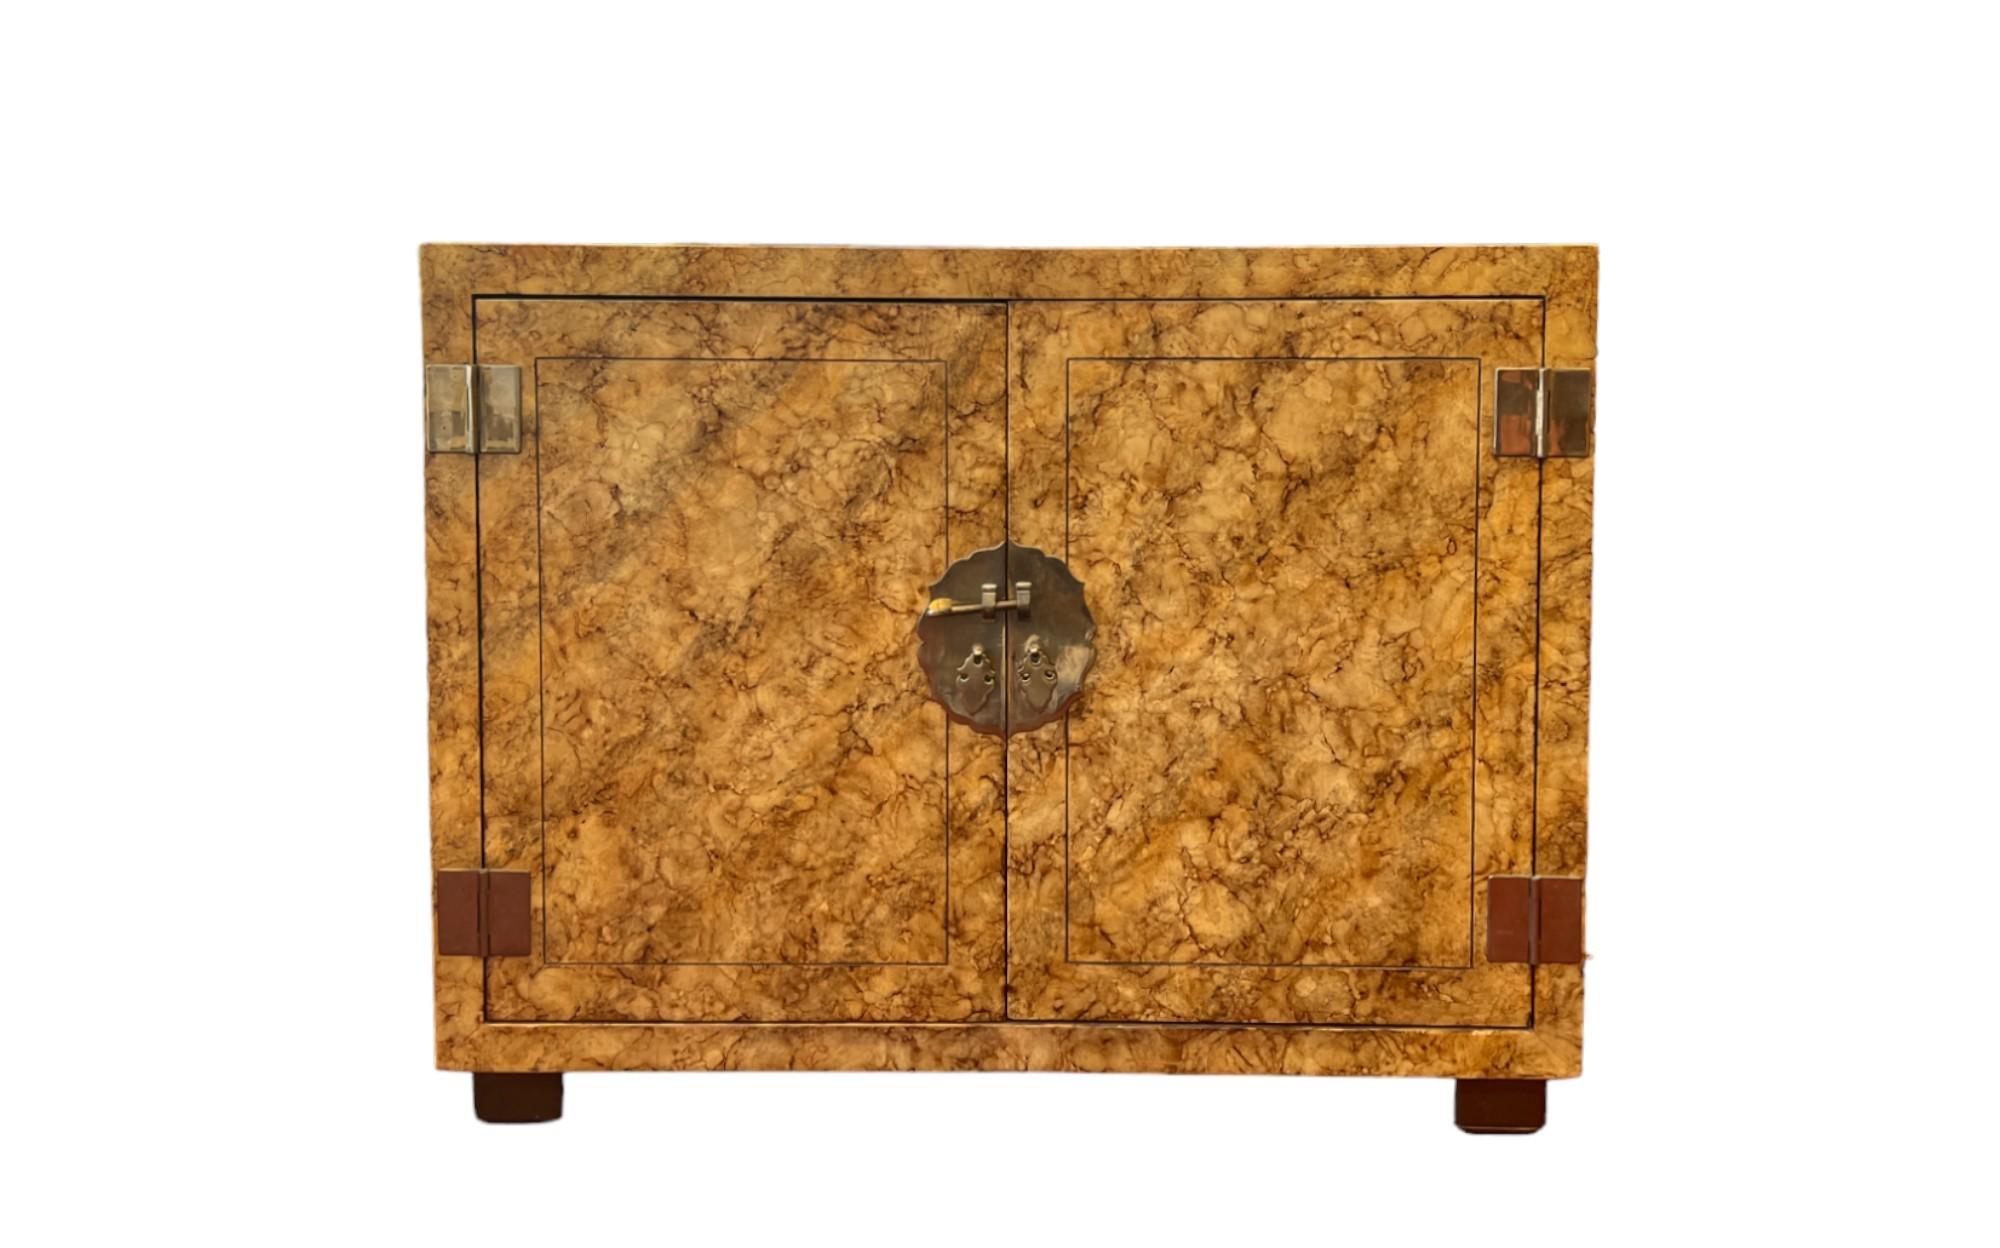 A pair of Mid-Century Modern contemporary Asian-inspired Tortoise Cabinets by Henredon. 

Each cabinet features a faux tortoise finish, hand-painted to perfection, ensuring that no two are alike. This distinctive finish showcases the beauty of a